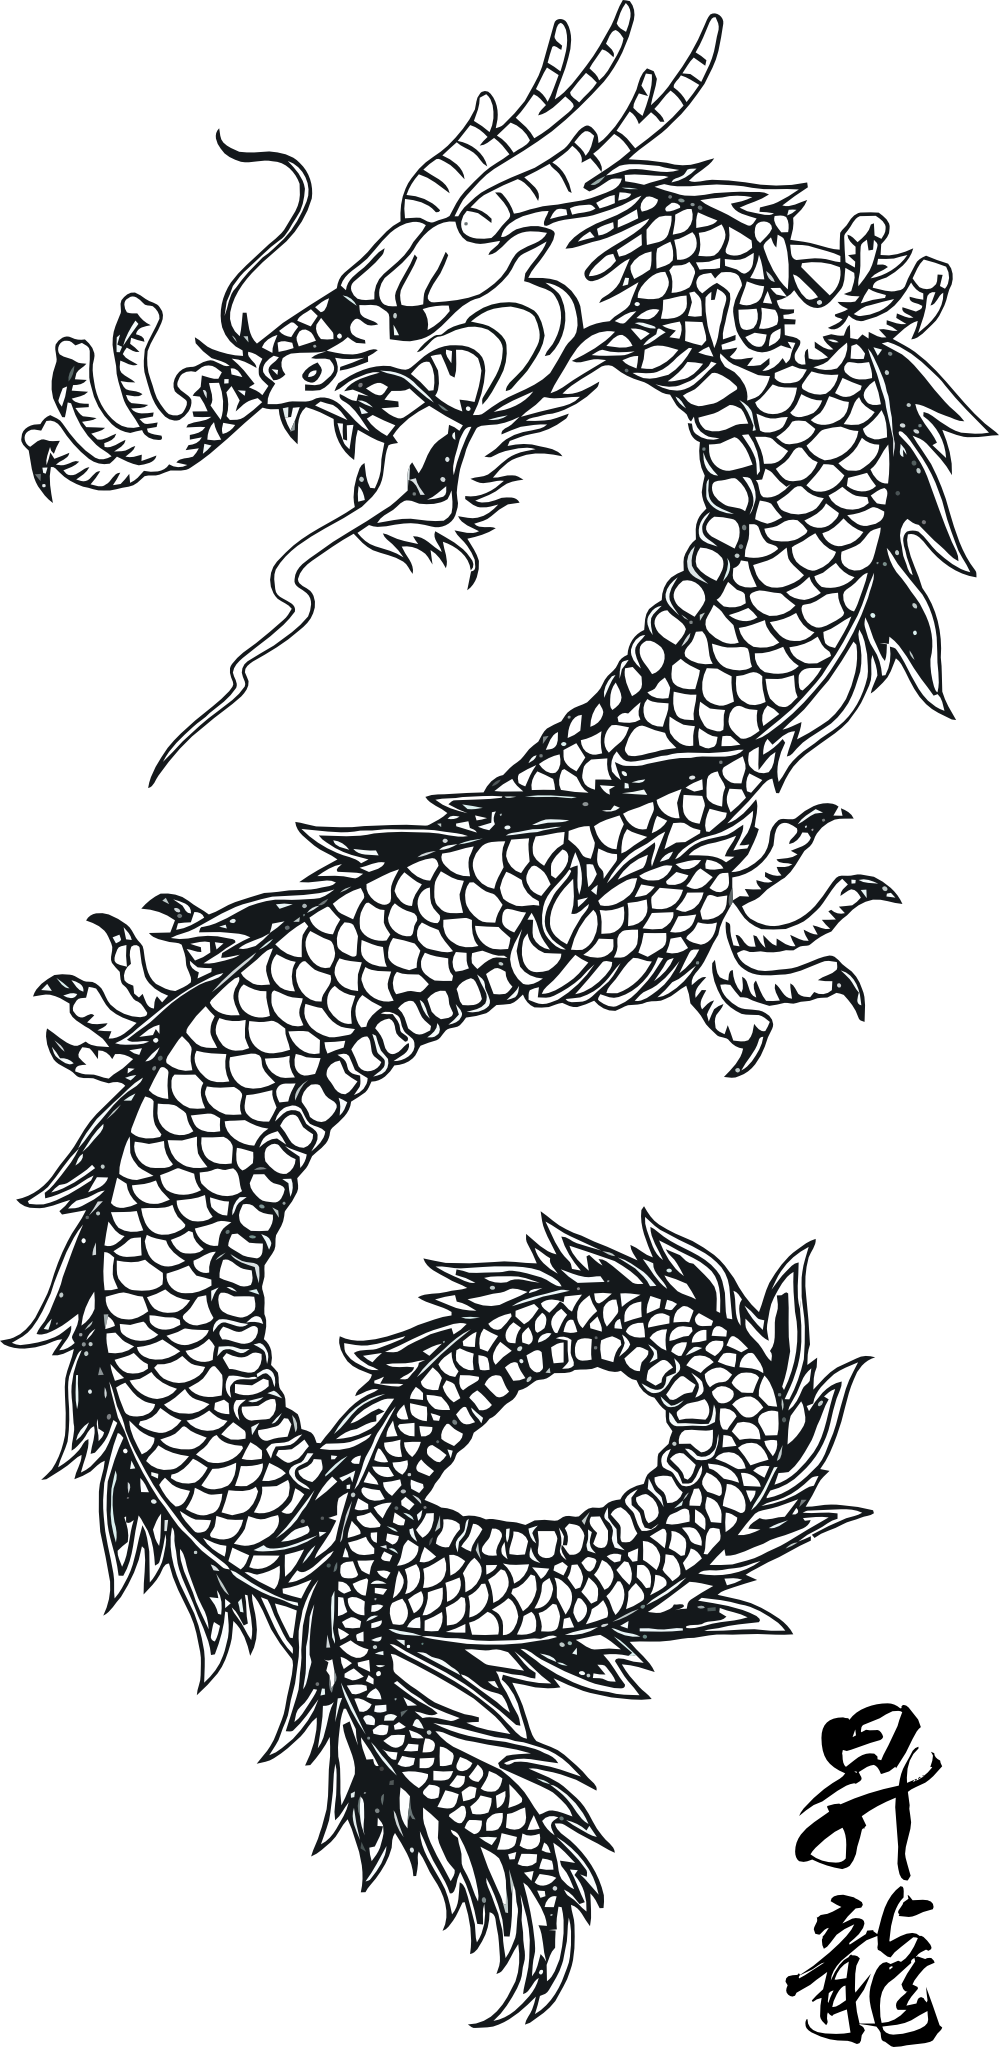 Chinese Dragon Image Black And White 